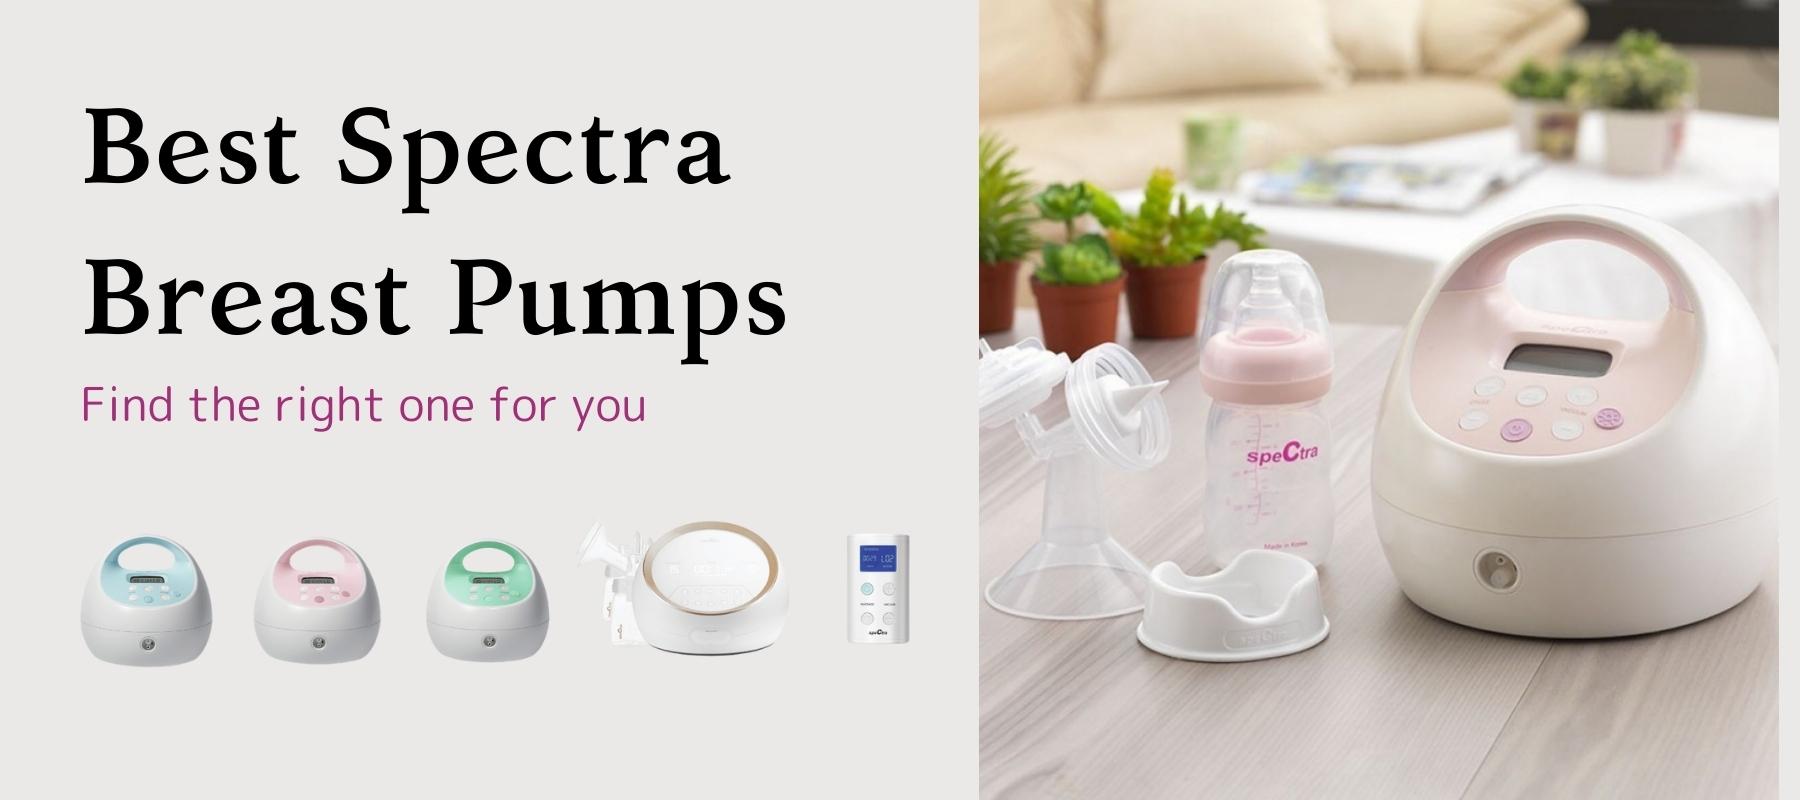 Best Spectra Breast Pumps: Find the Right One for You